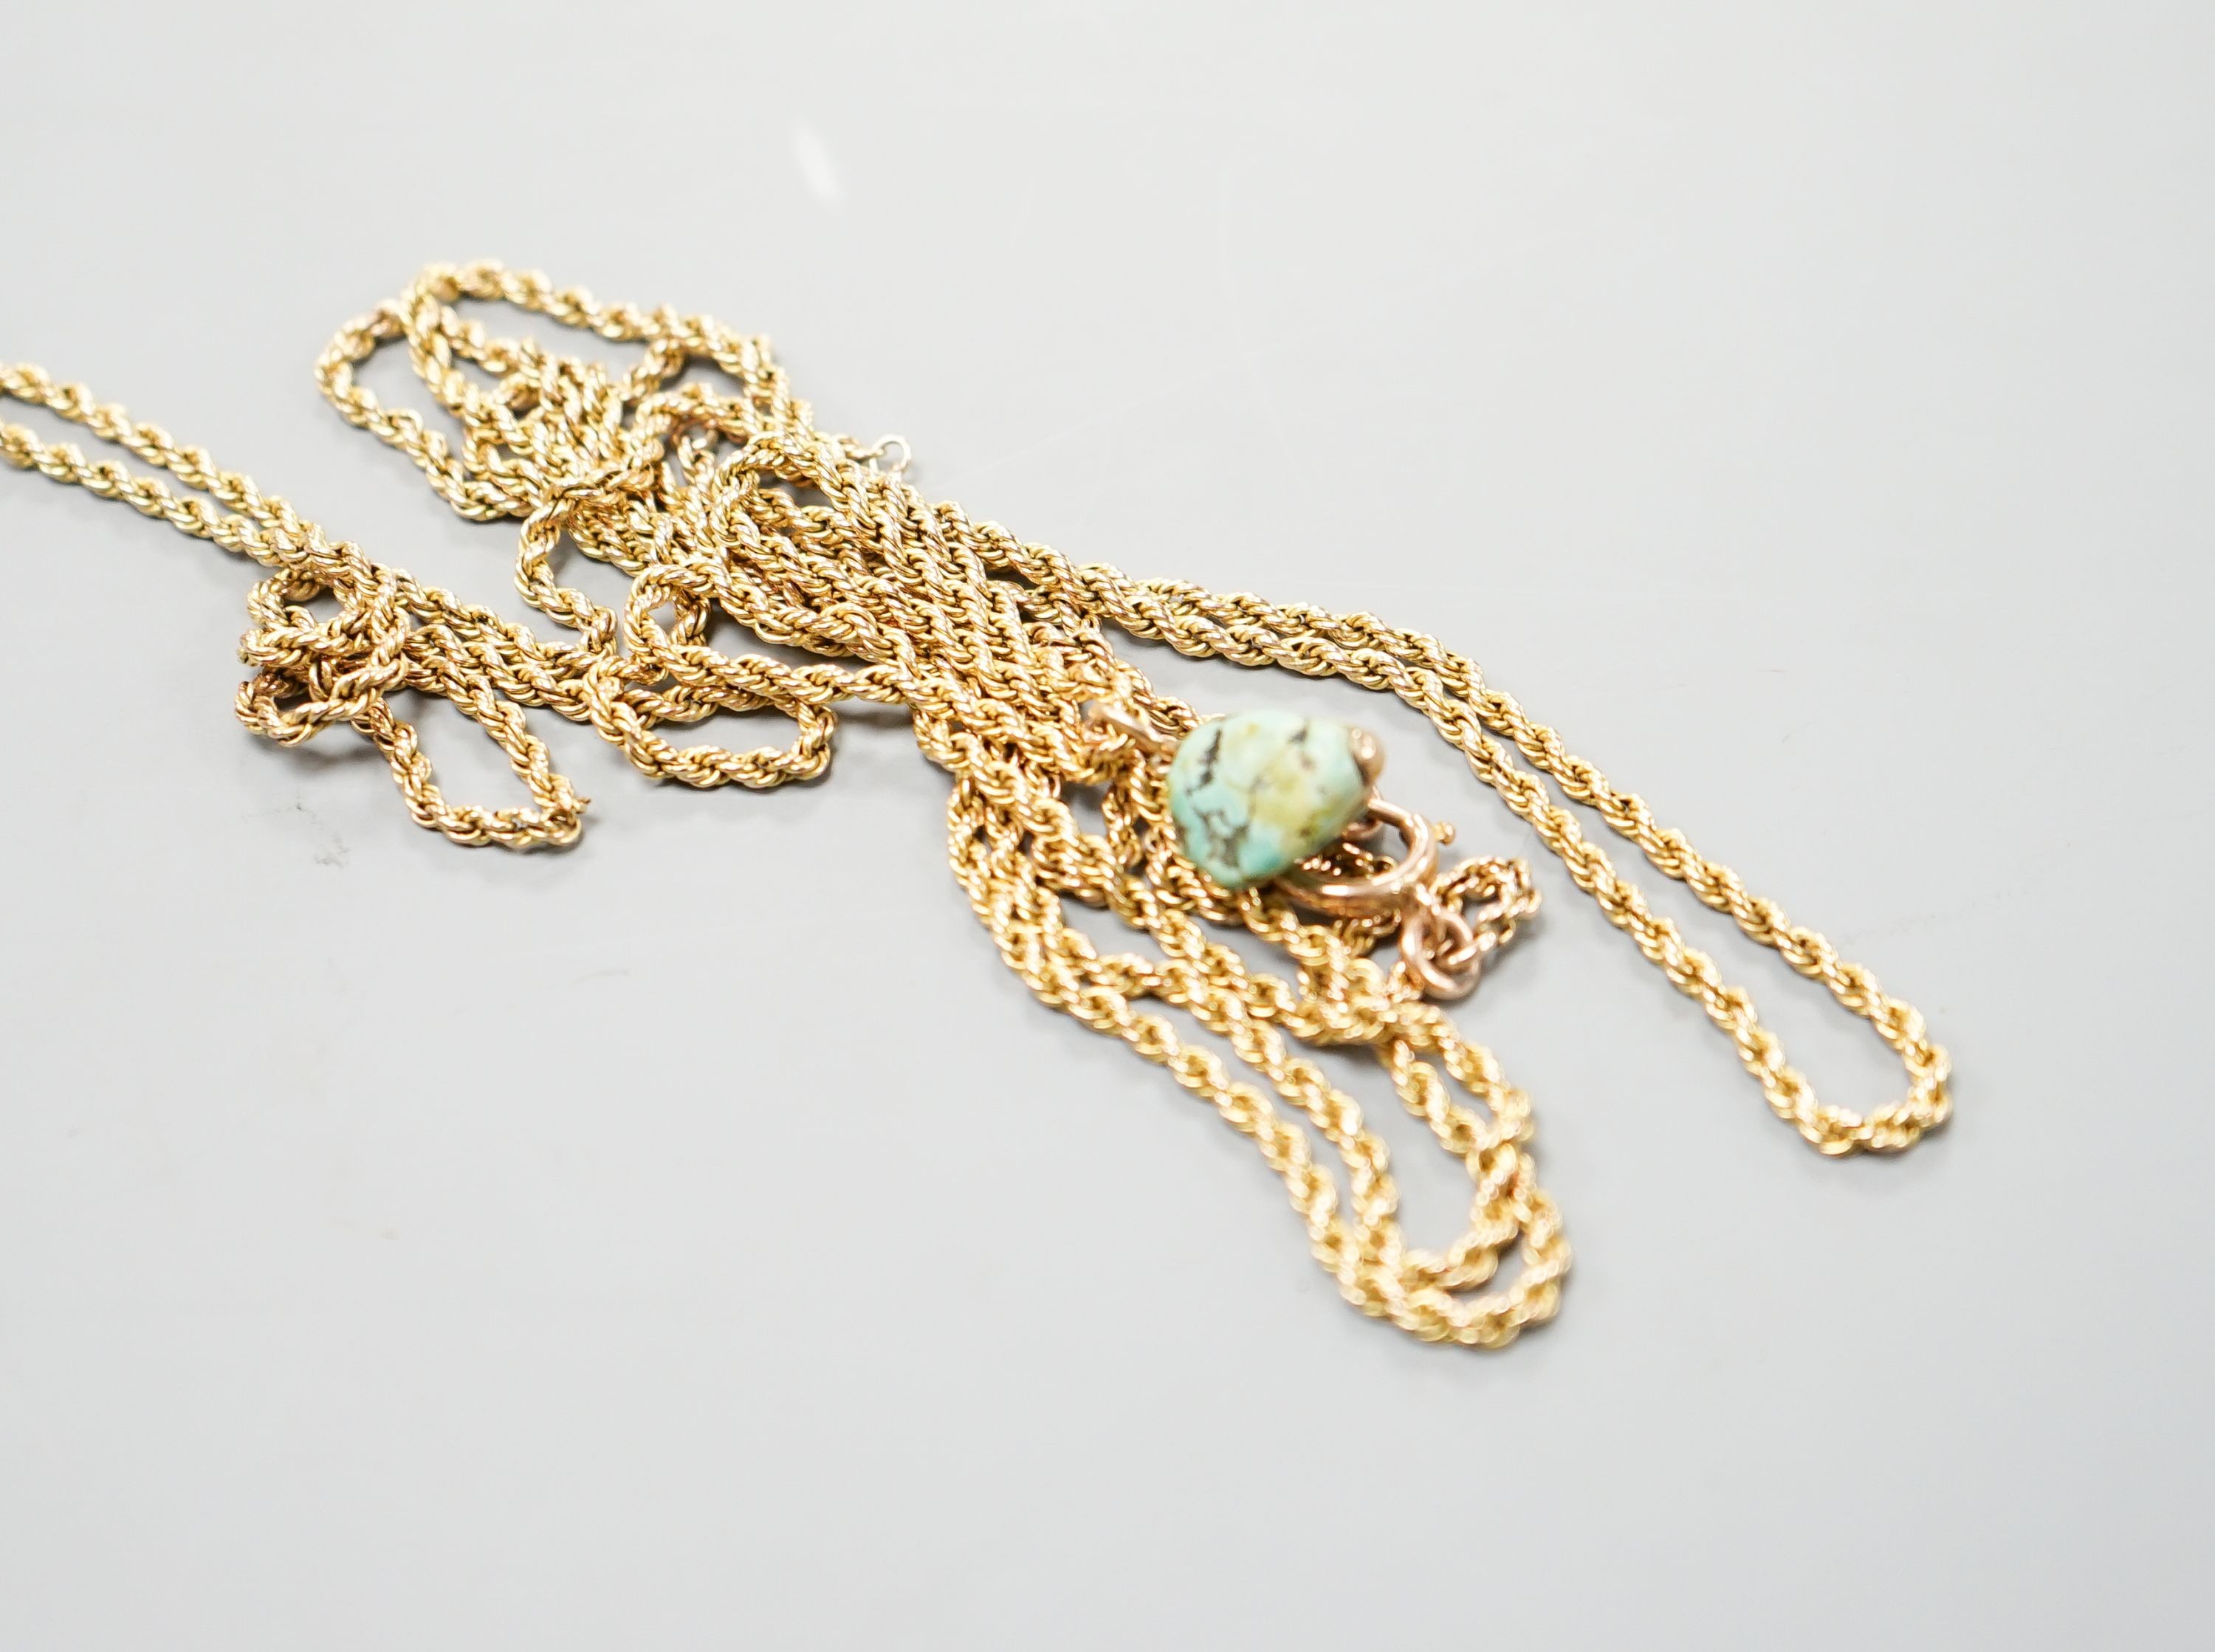 A 9ct rope twist guard chain, with turquoise pebble pendant, chain length, 146cm